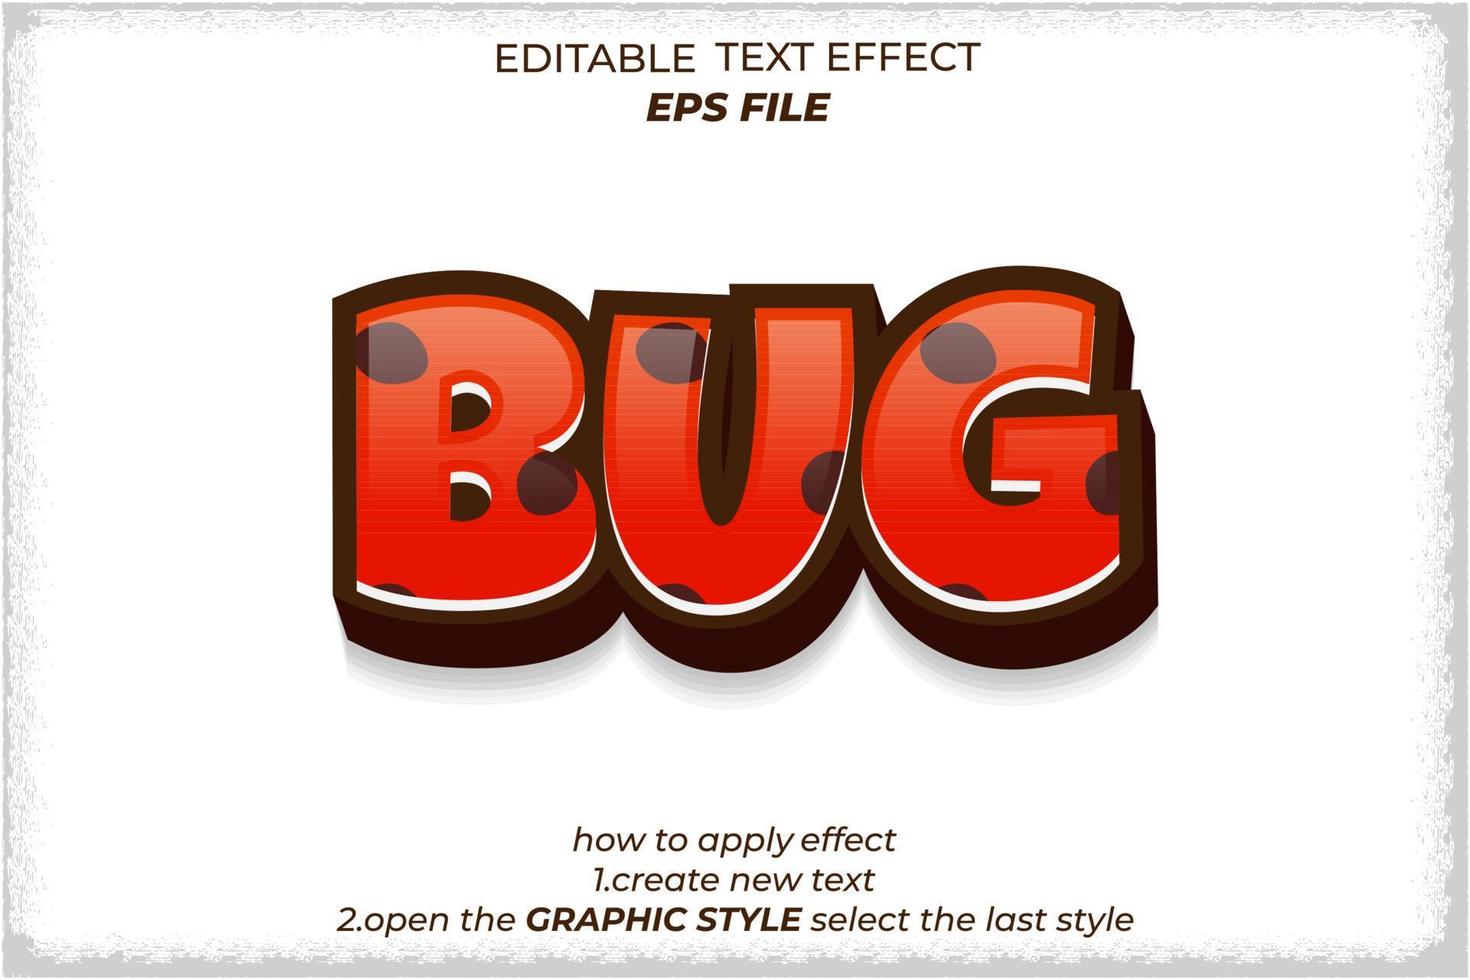 bug text effect, font editable, typography, 3d text. vector template